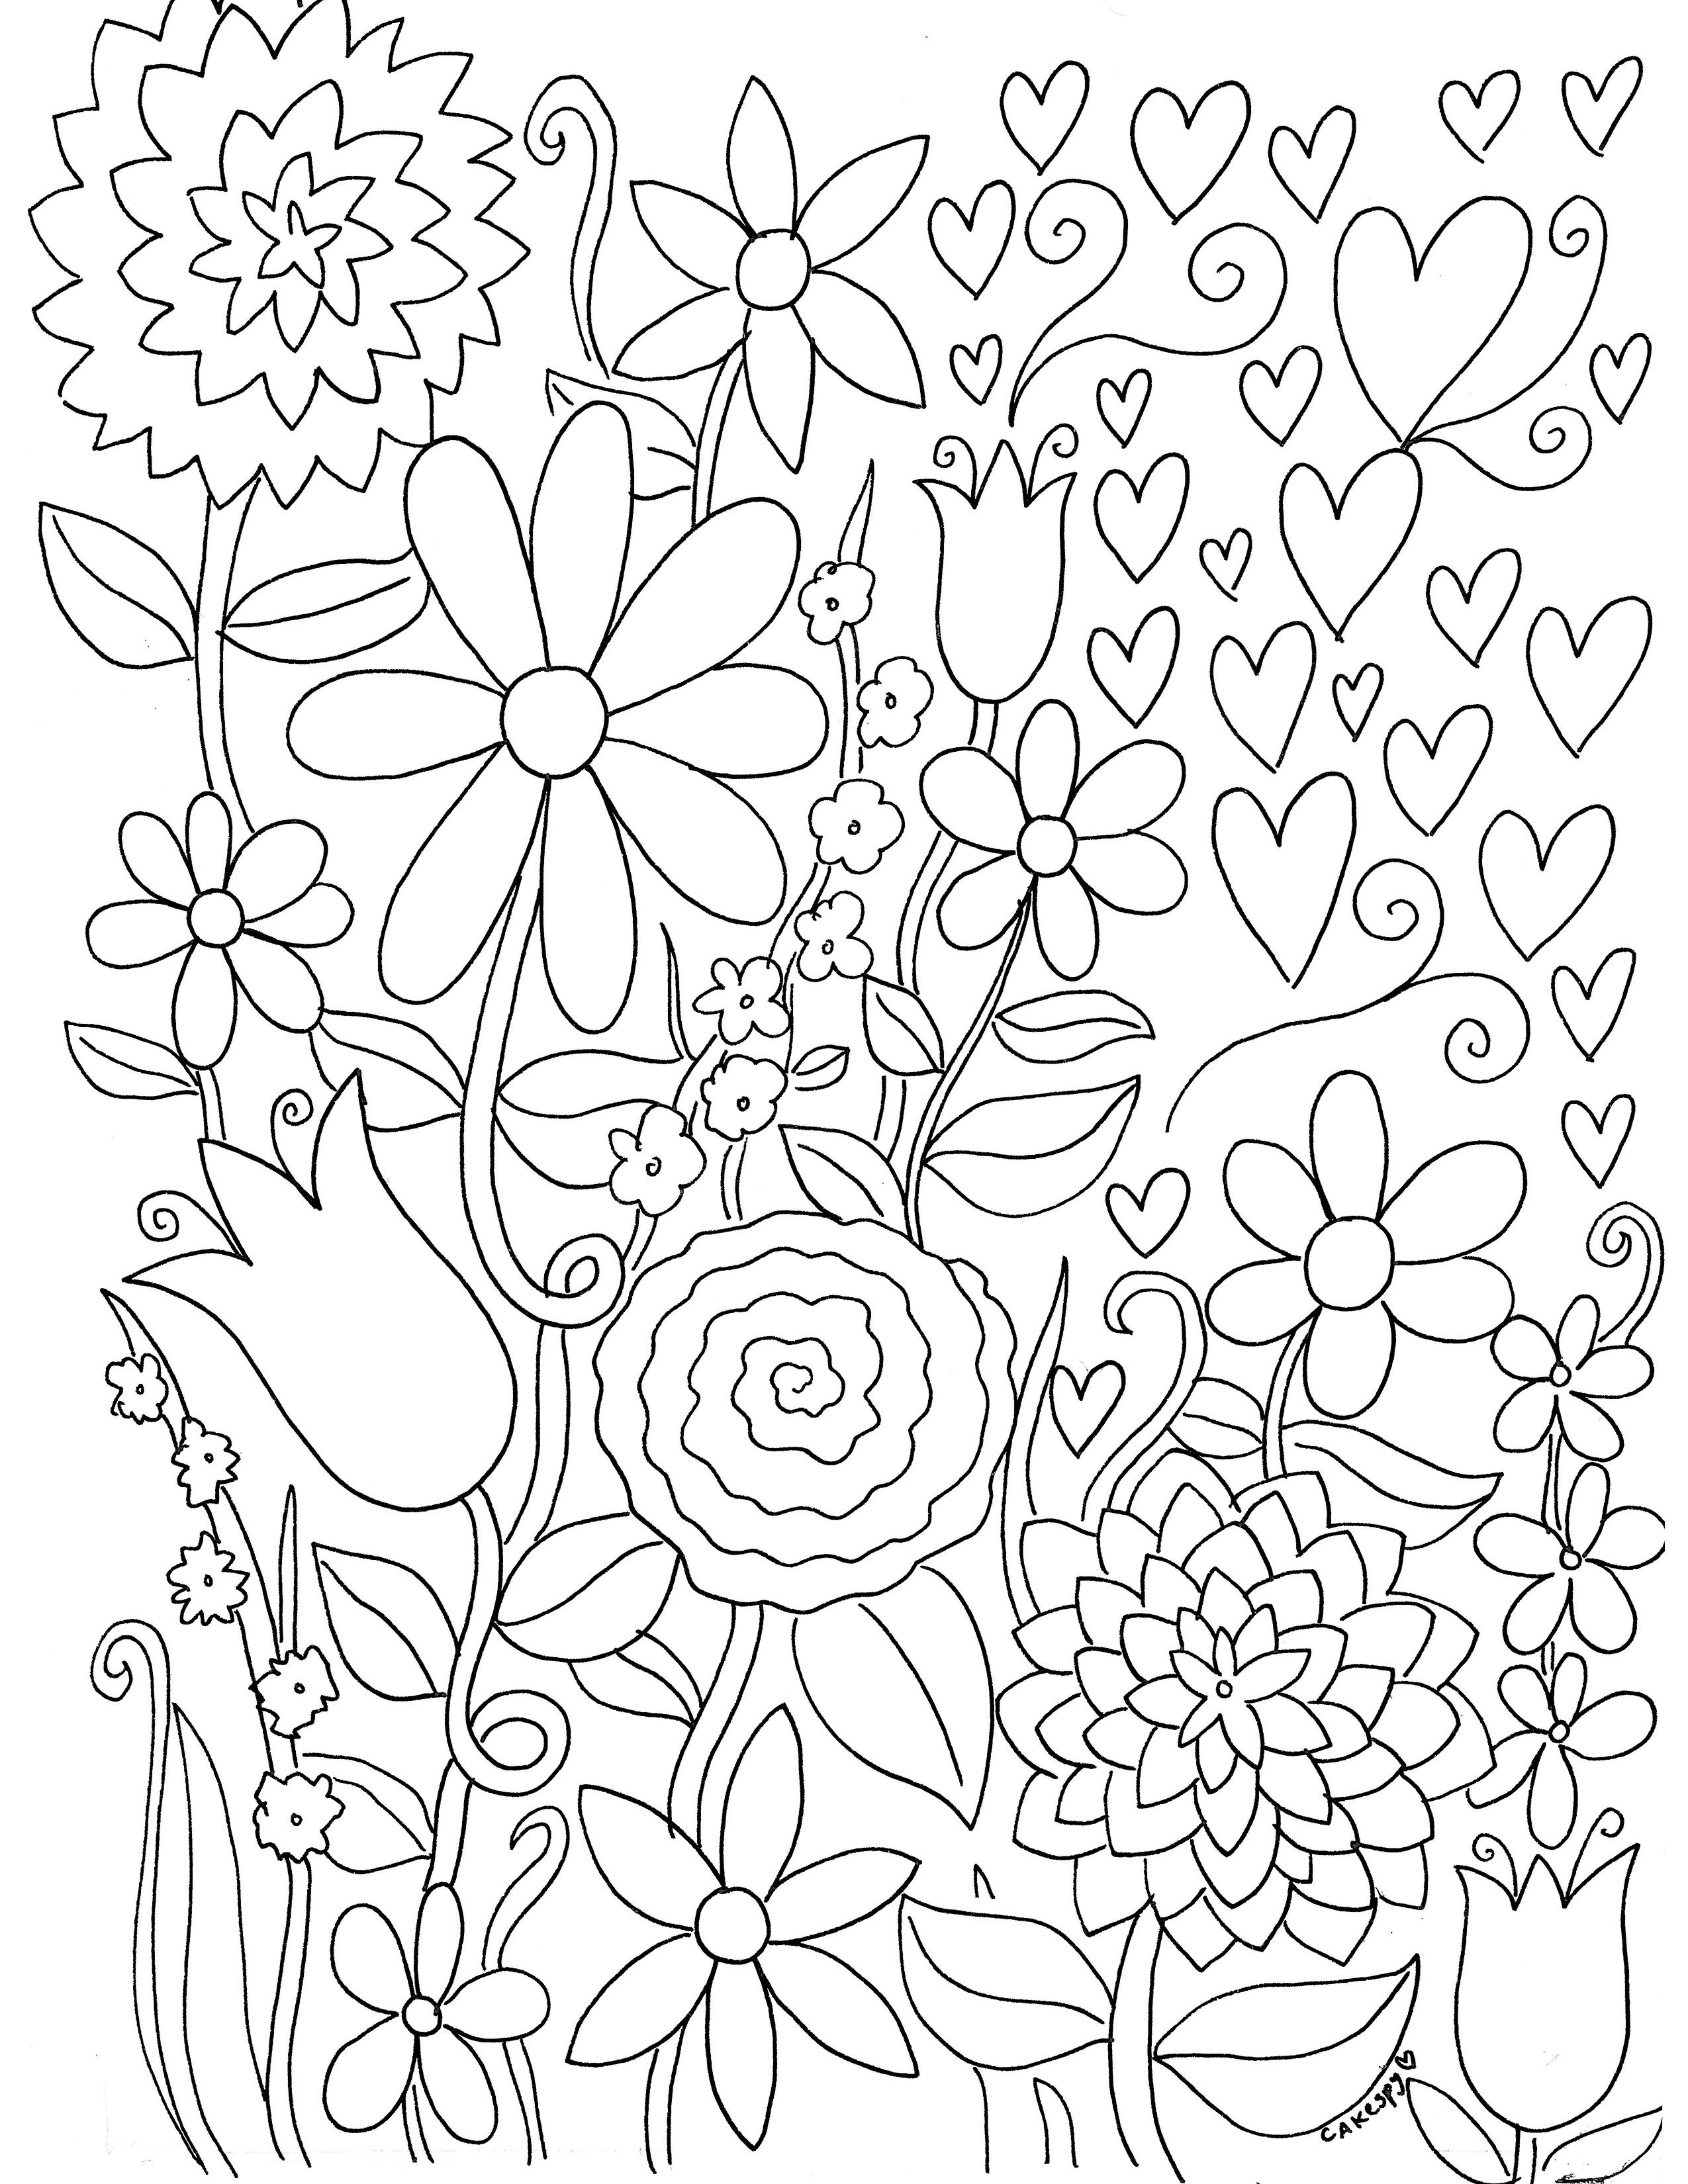 Free Paintnumbers For Adults Downloadable | *printable Art - Free Printable Flower Coloring Pages For Adults